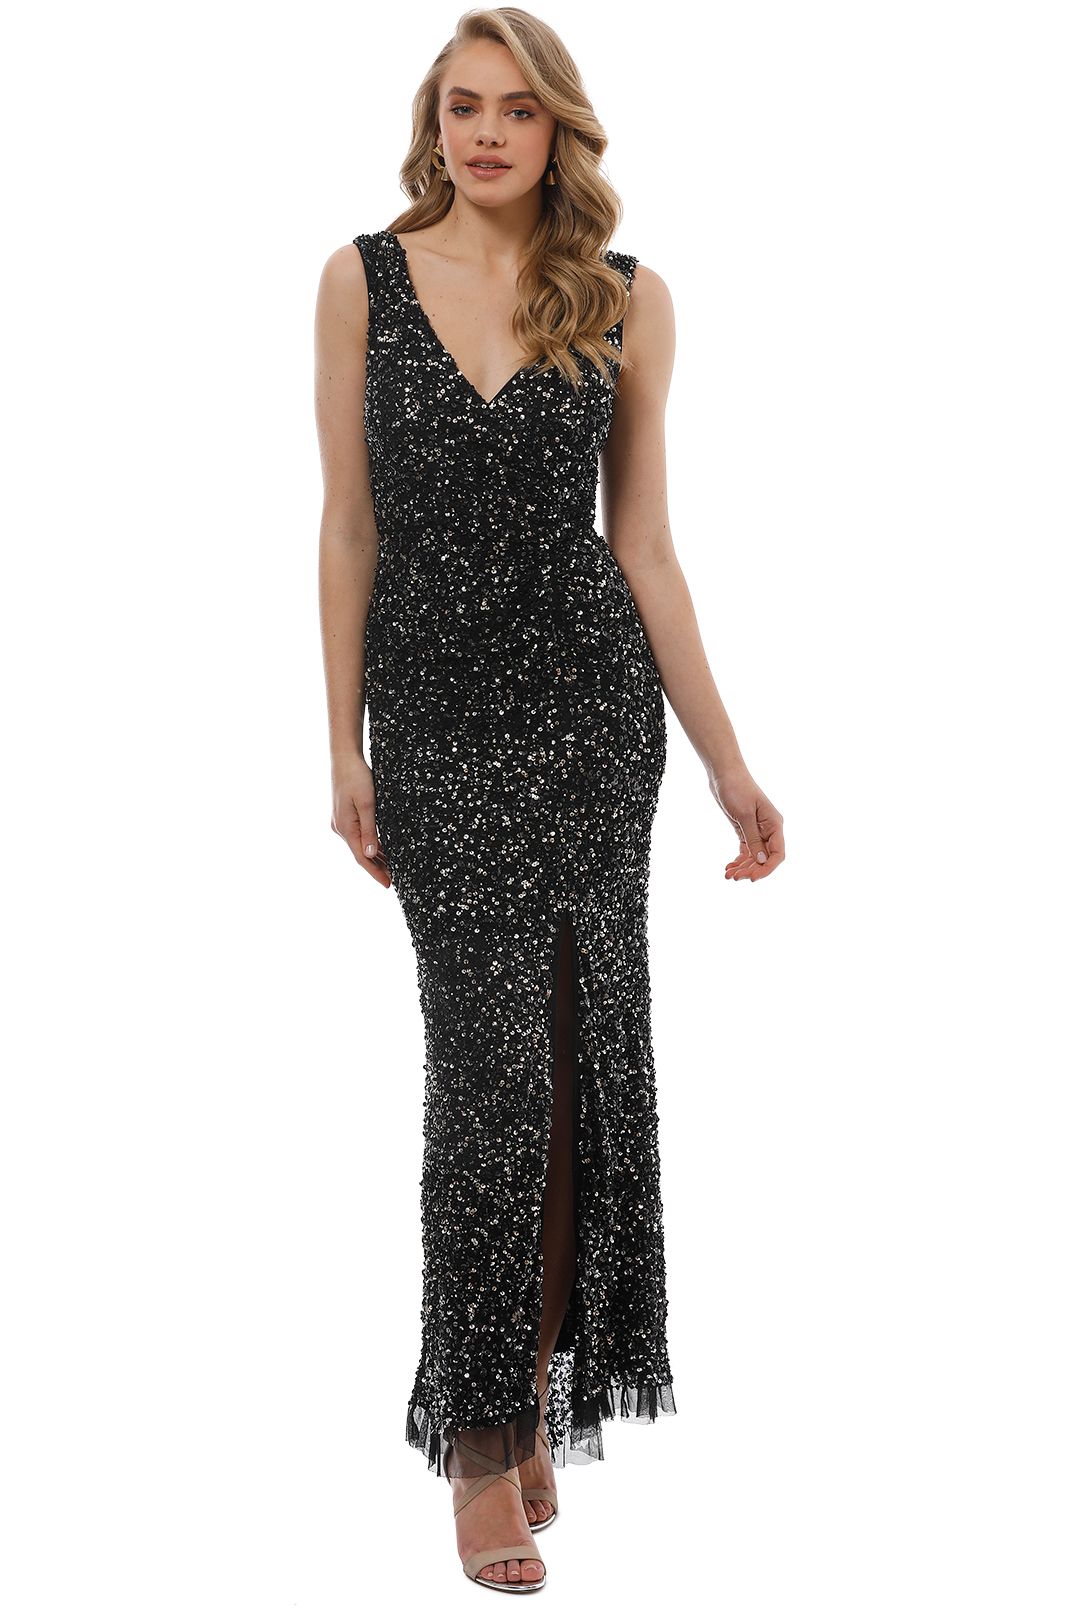 Montique - Layla Hand Beaded Dress - Gold Sequin - Front